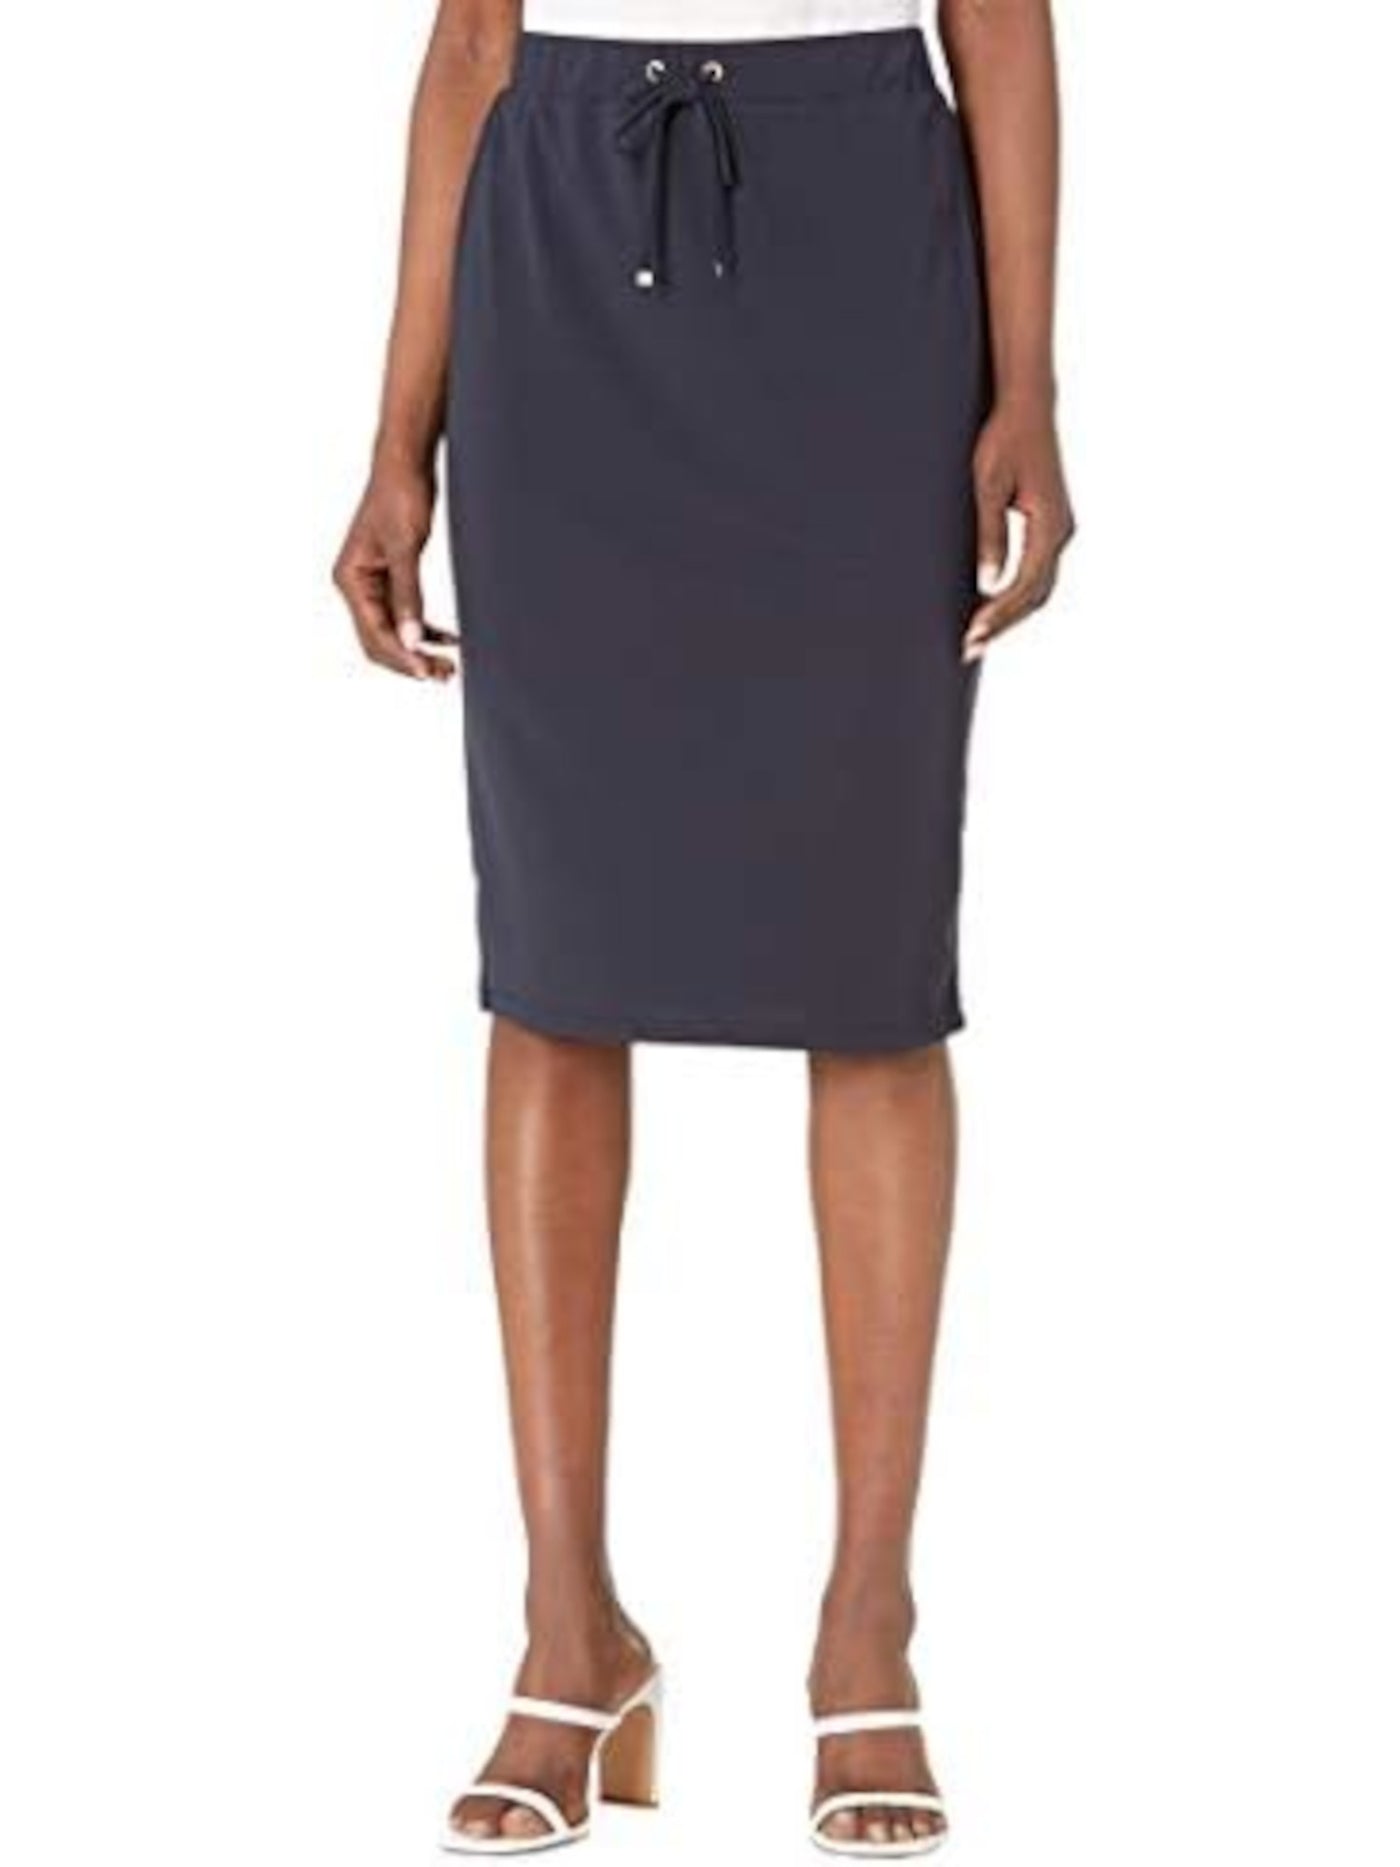 TOMMY HILFIGER Womens Navy Stretch Tie Unlined Pull-on Elastic Waist Knee Length Wear To Work Pencil Skirt S